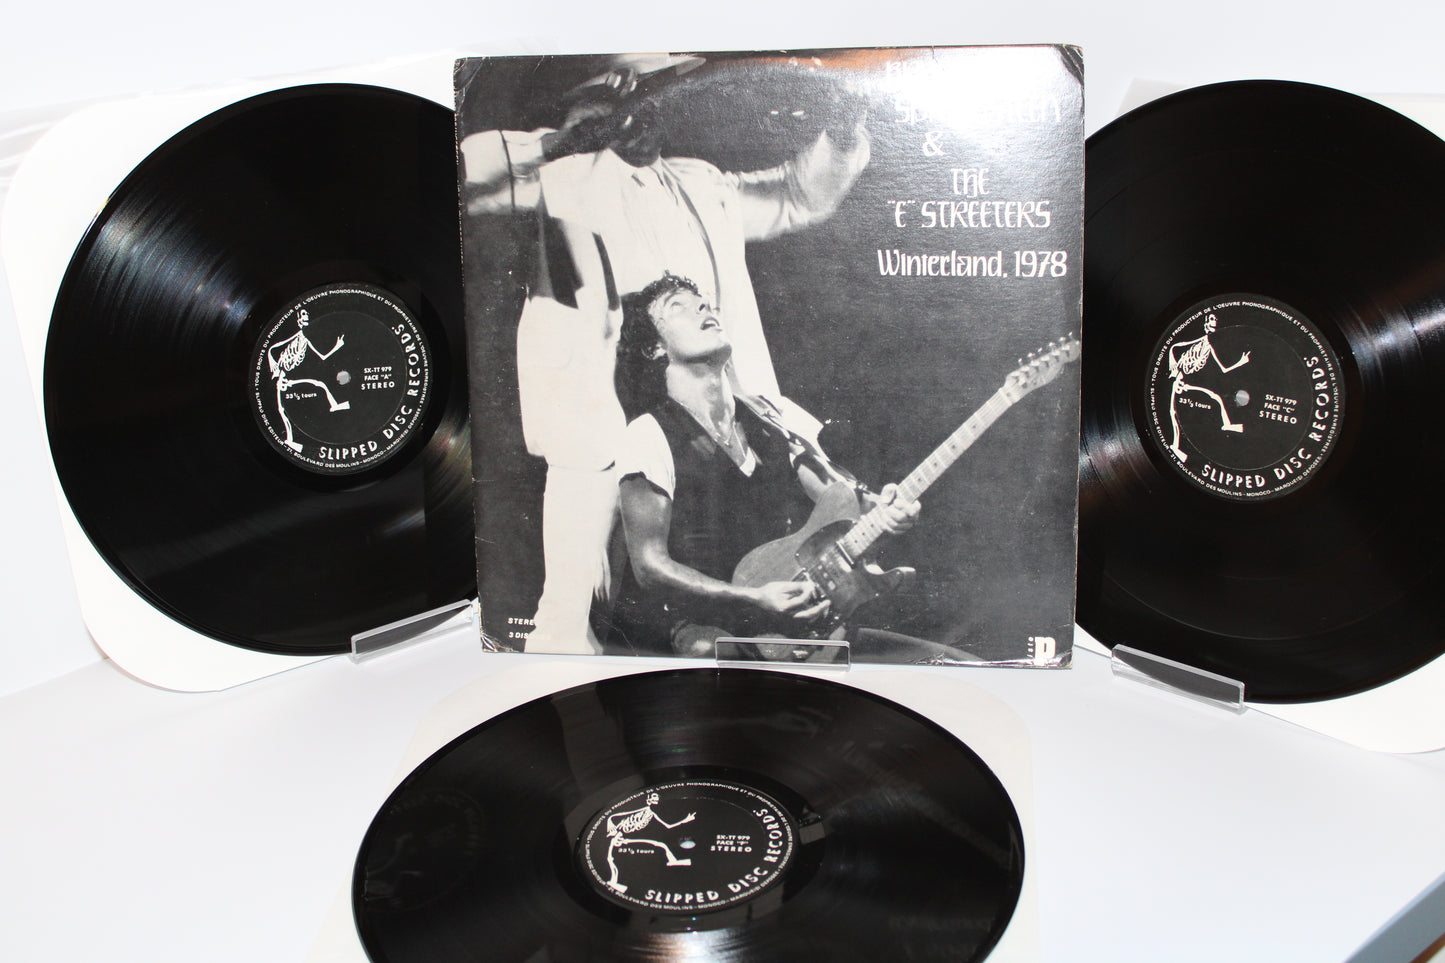 Bruce Springsteen & The "E" Streeters - Winterland, 1978 (Live In The Promised Land) 3LPs Bootleg Vinyl